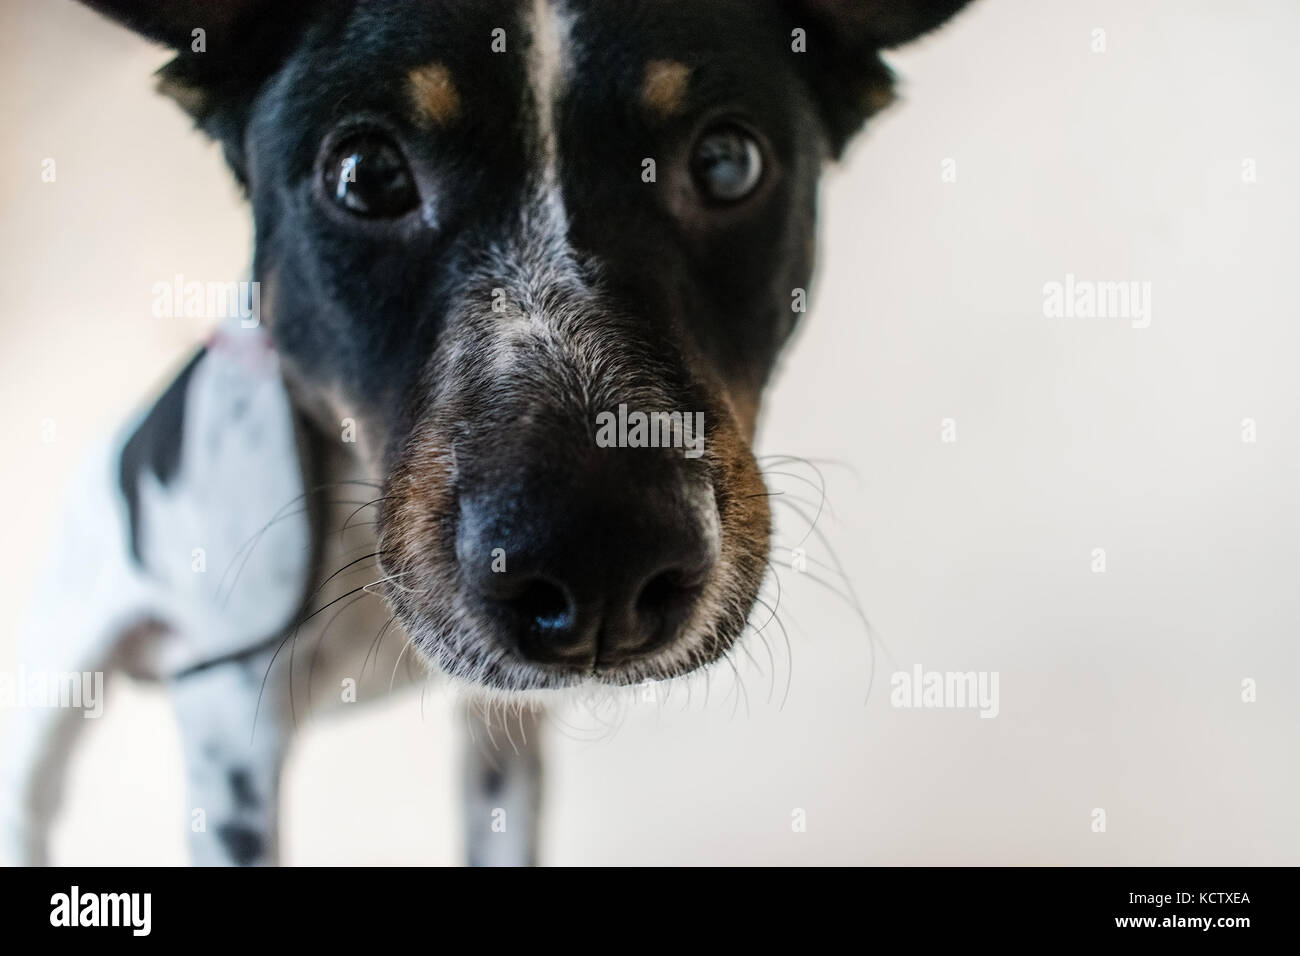 Dog nose closeup, shallow depth of field and focus, wide angle fish eye effect, white background Stock Photo